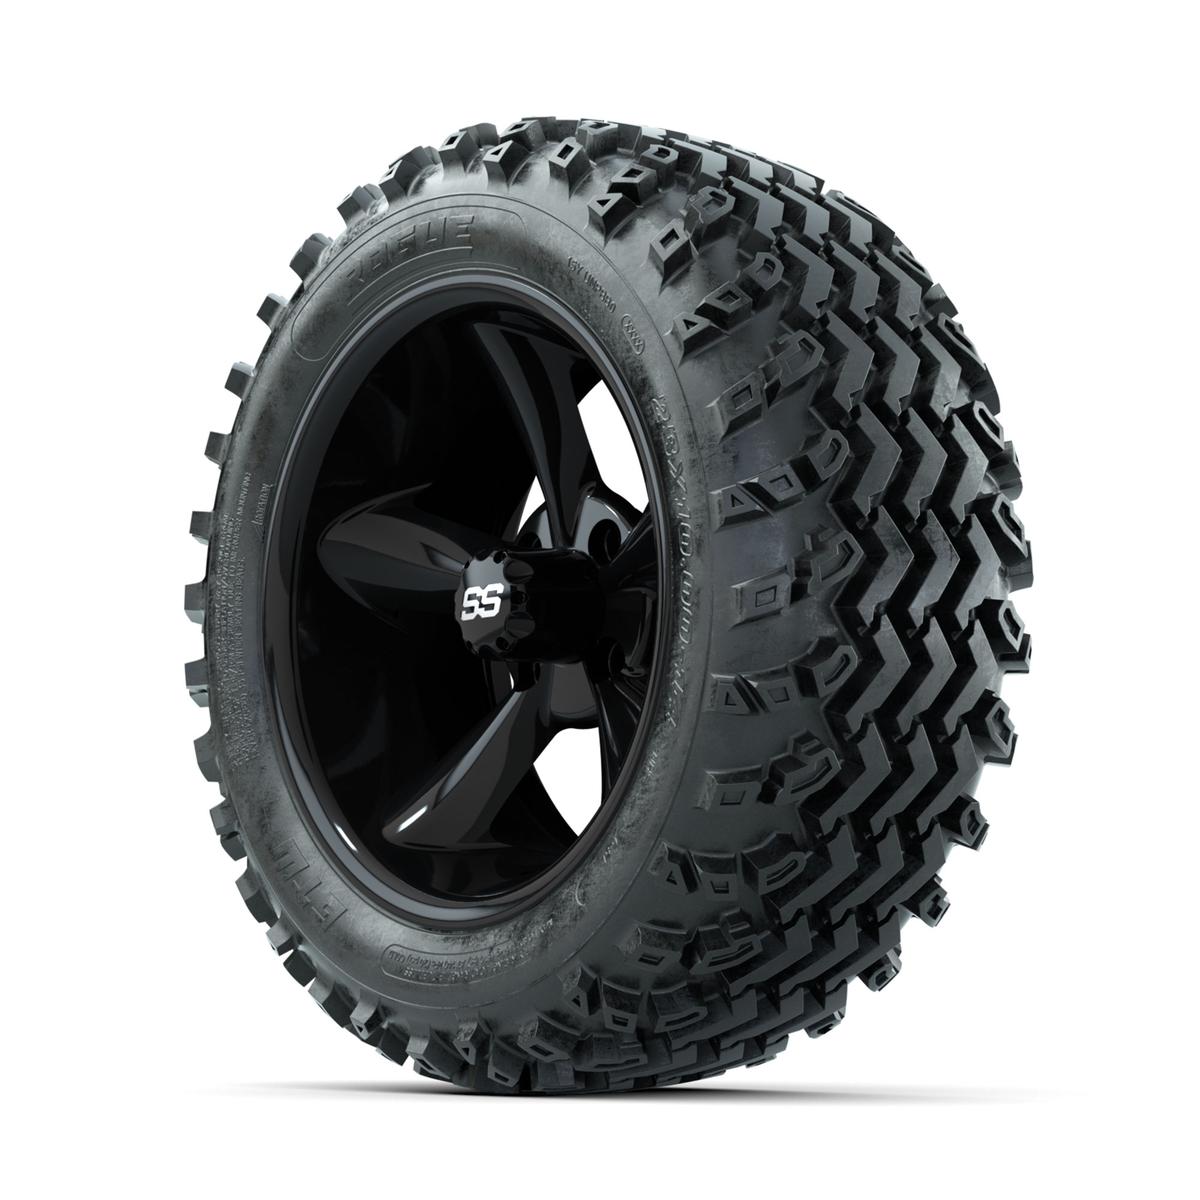 GTW Godfather Black 14 in Wheels with 23x10.00-14 Rogue All Terrain Tires – Full Set